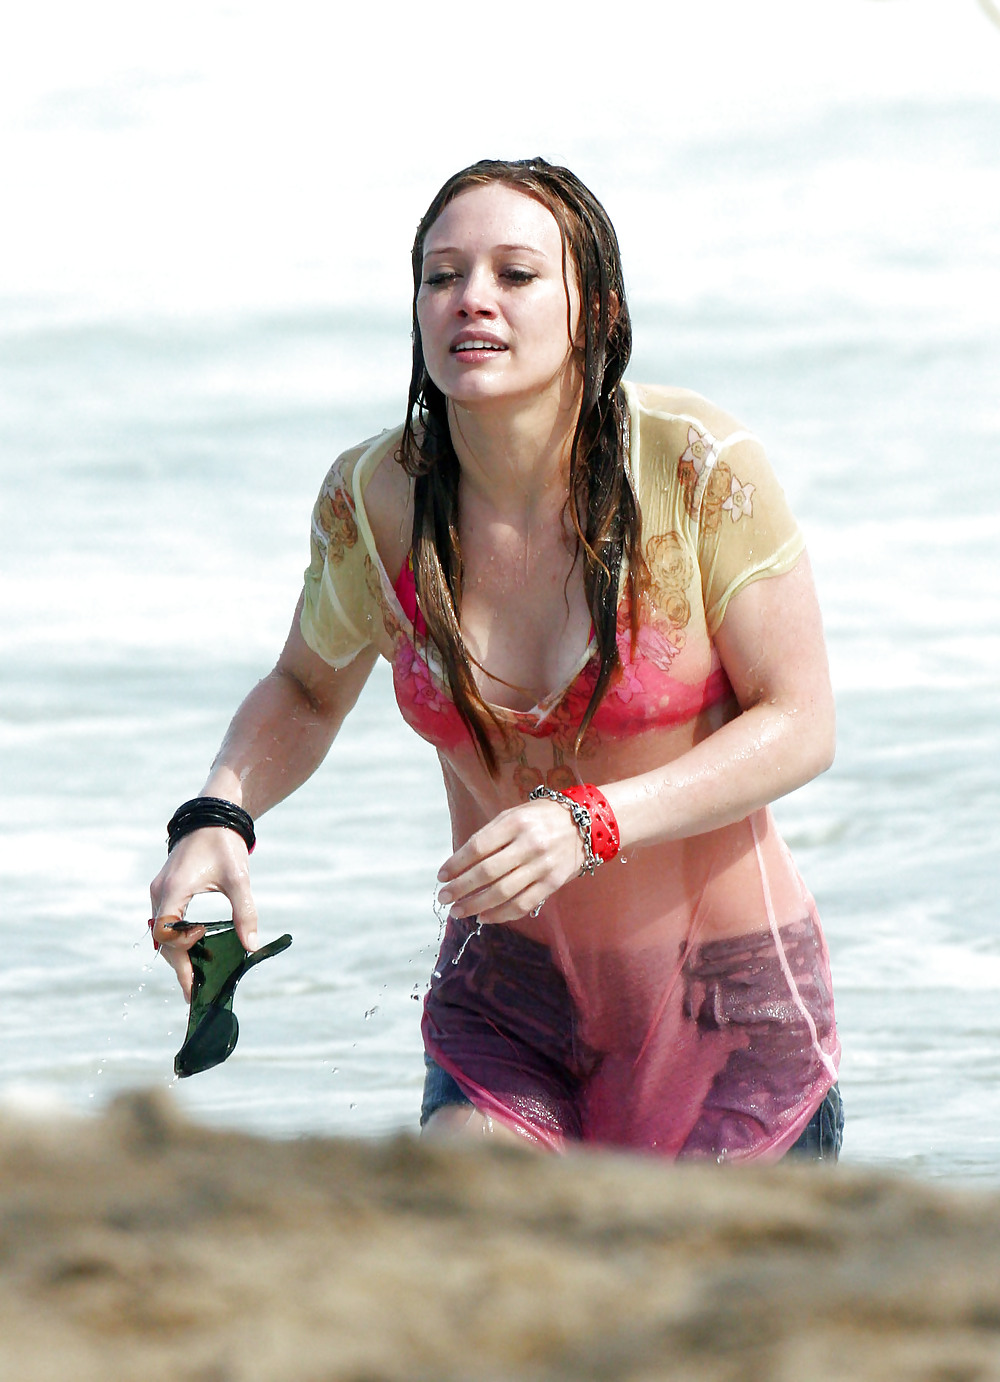 Hilary Duff at the Beach playing around in a wet shirt #7220939